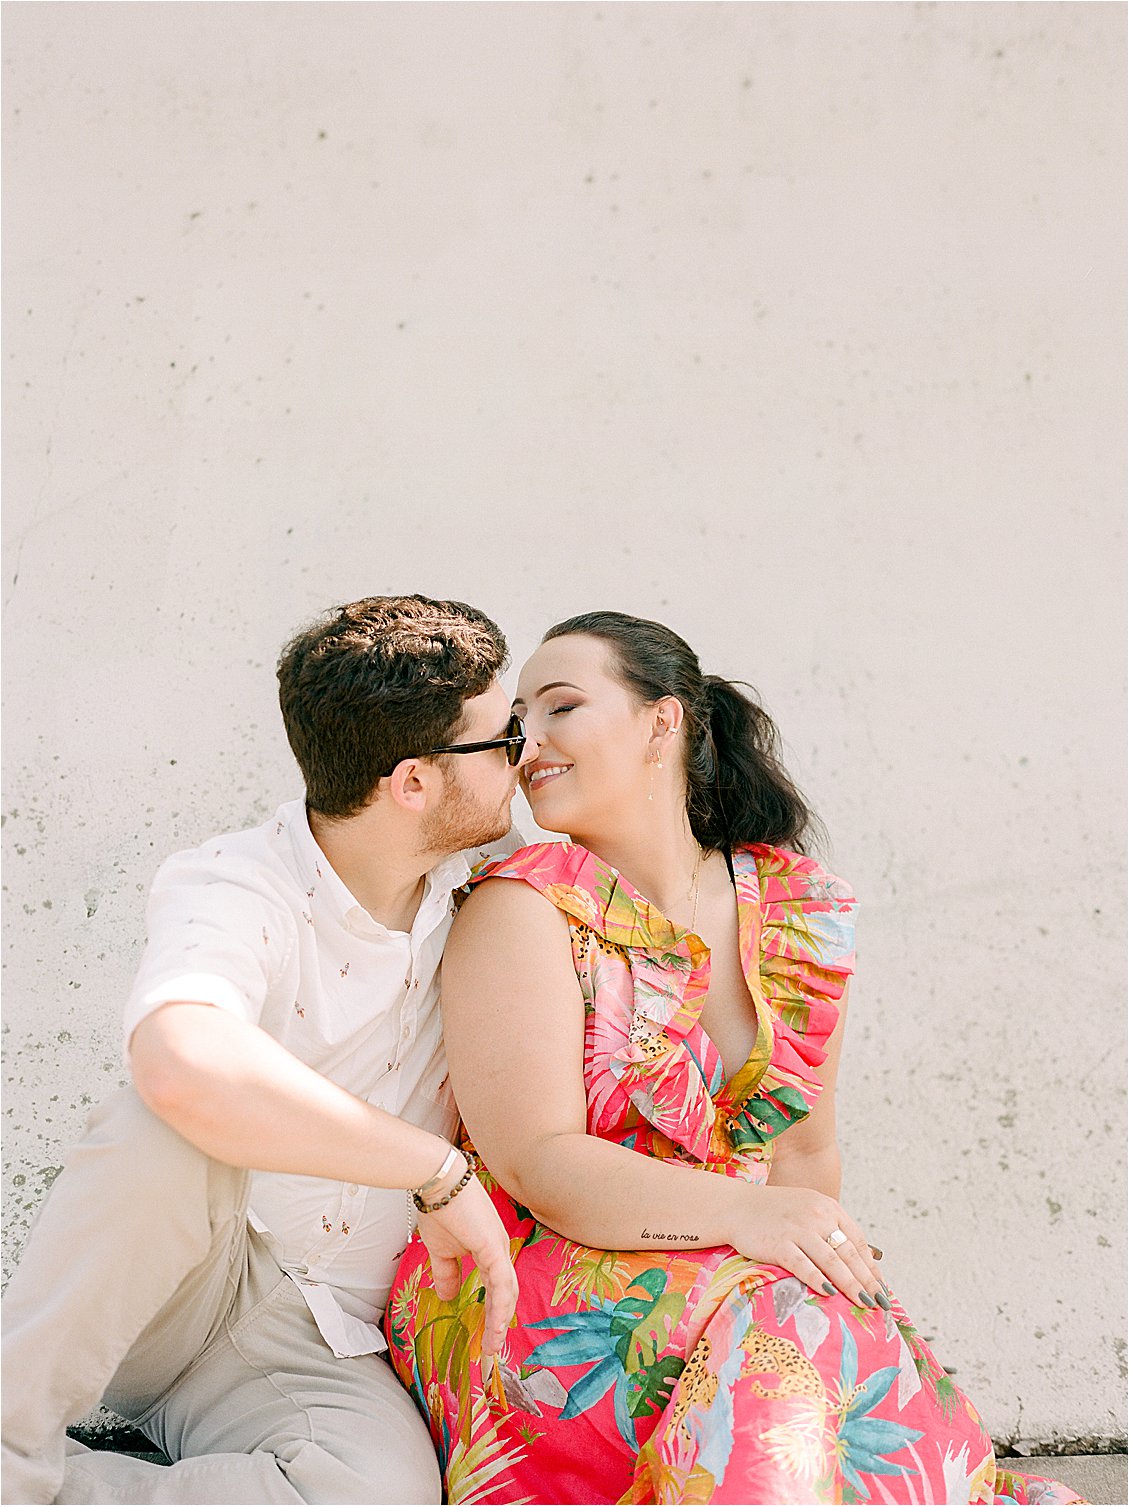 Modern and Bright anniversary session in Chicago by Renee Hollingshead